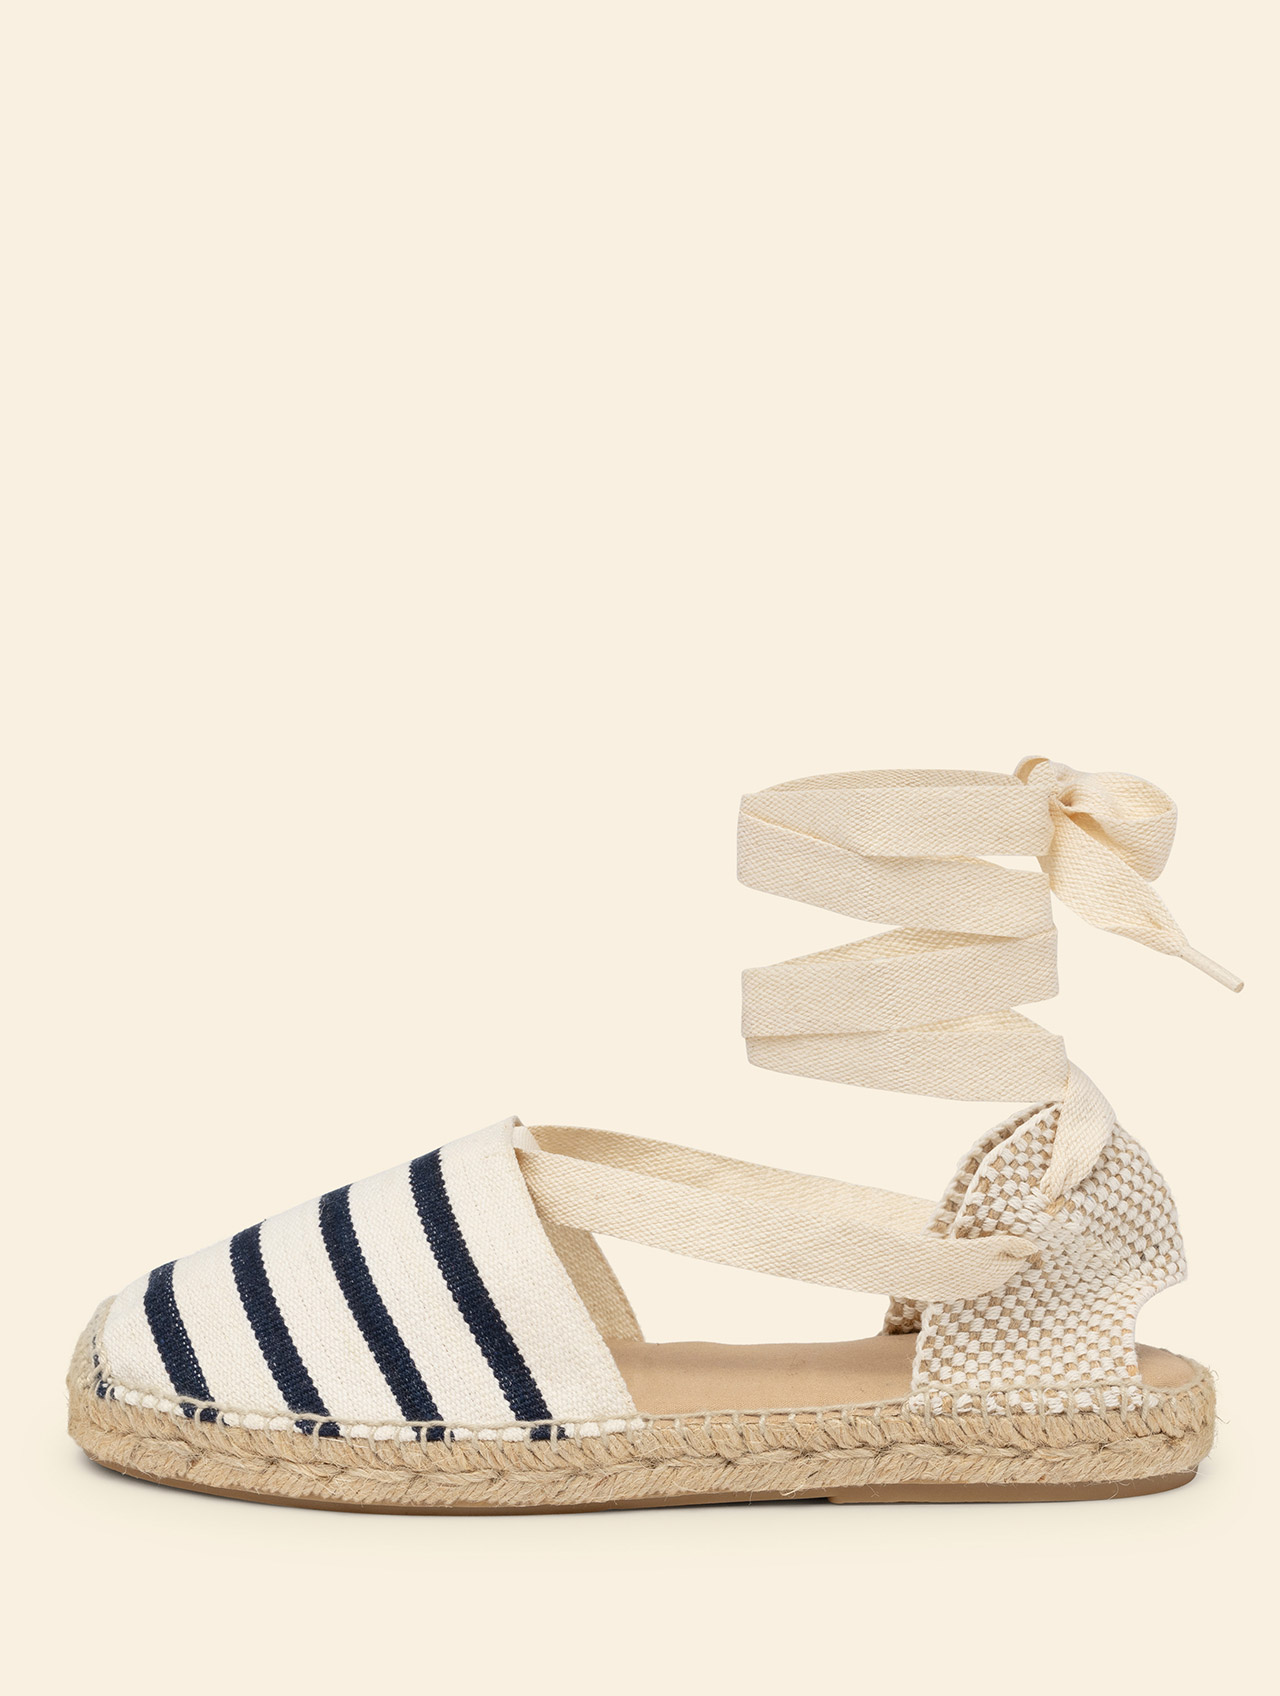 Woman flat espadrille valenciana stripes ivory and navy. Lace up flat espadrille